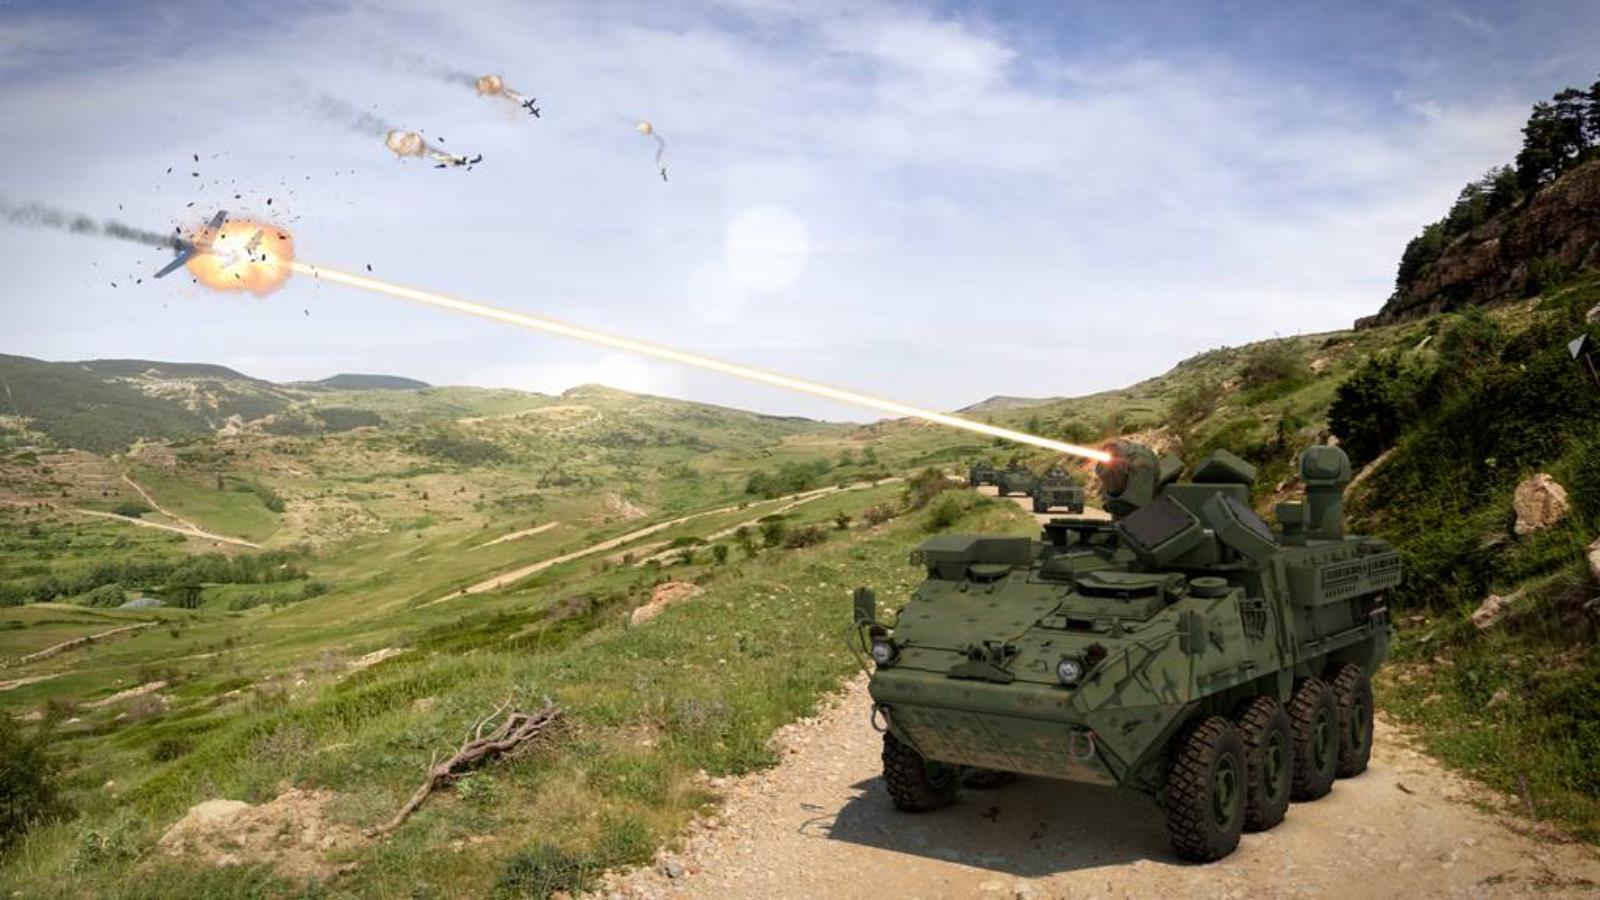 The first military Stryker vehicles with a 50-kilowatt laser are coming